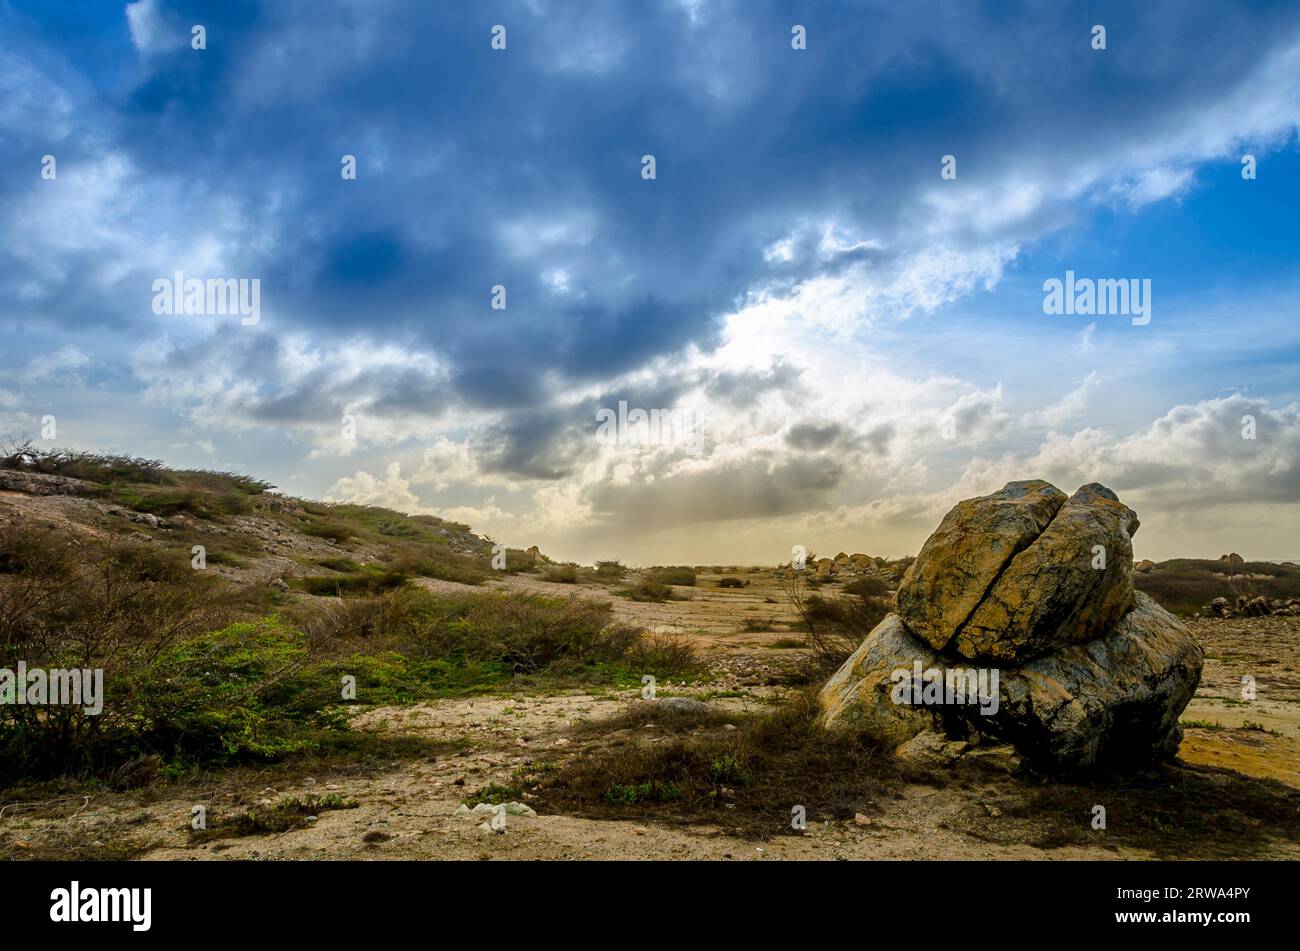 Dry and arid desert landscape with rocks and native plants in Aruba Island at the Caribbean sea Stock Photo